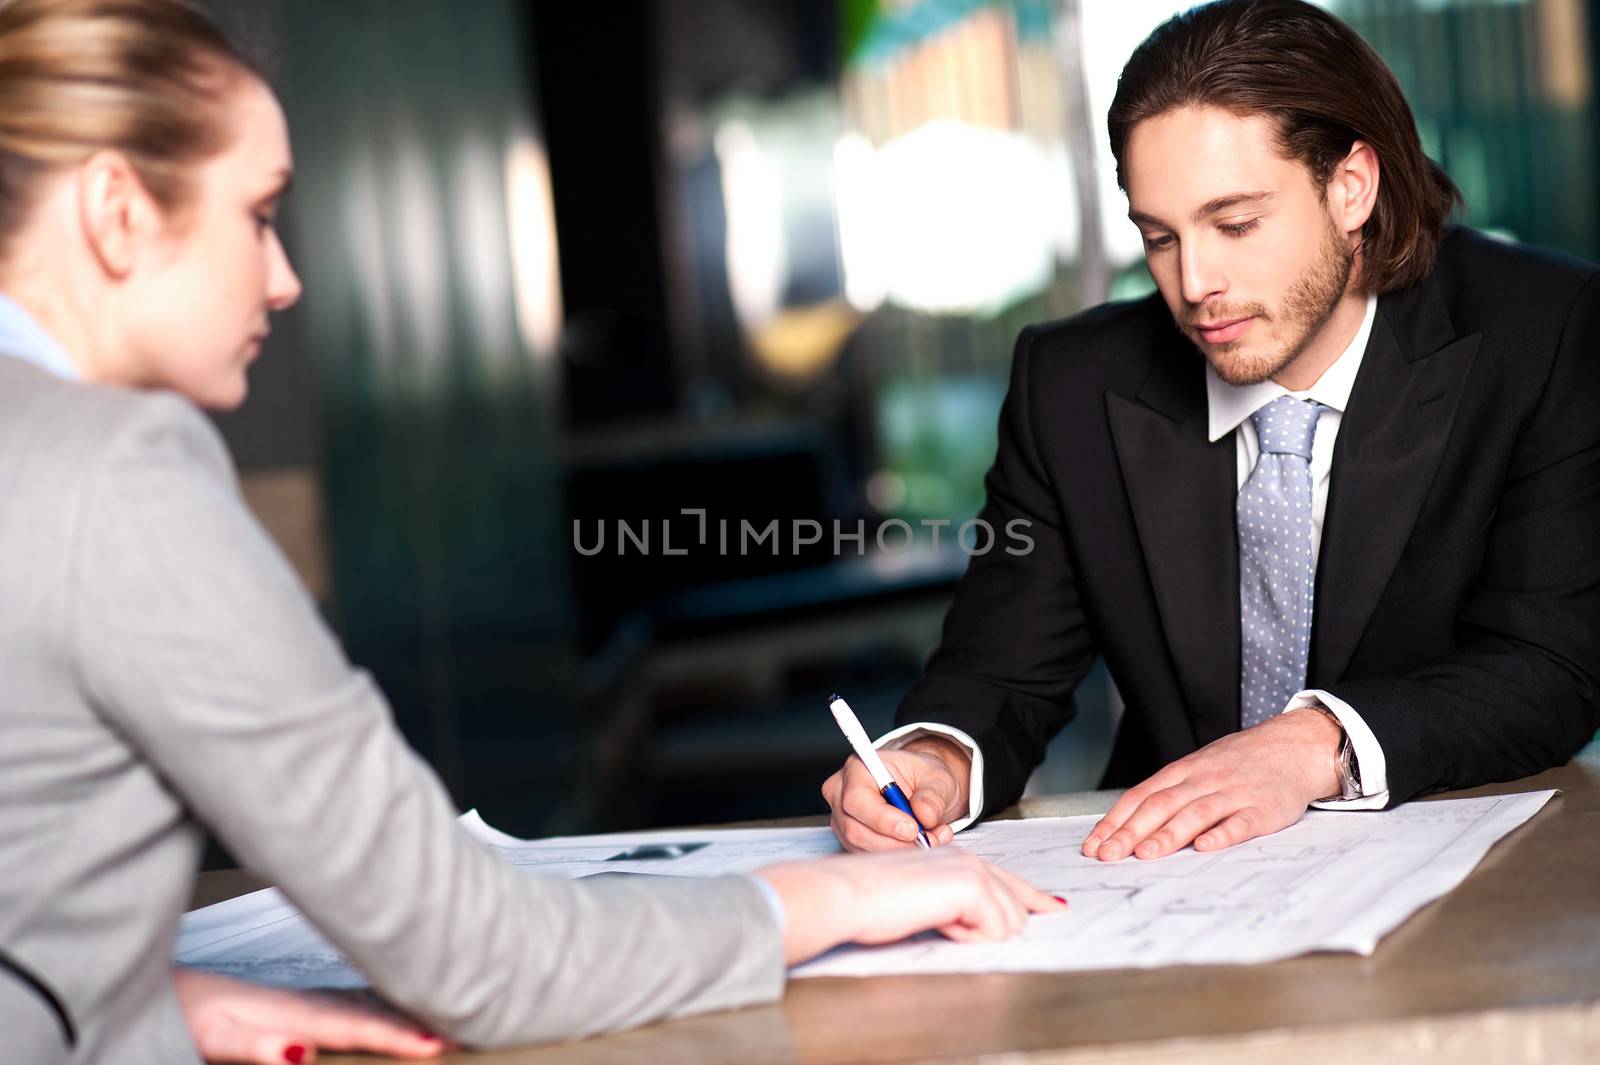 Colleagues discussing business plan by stockyimages